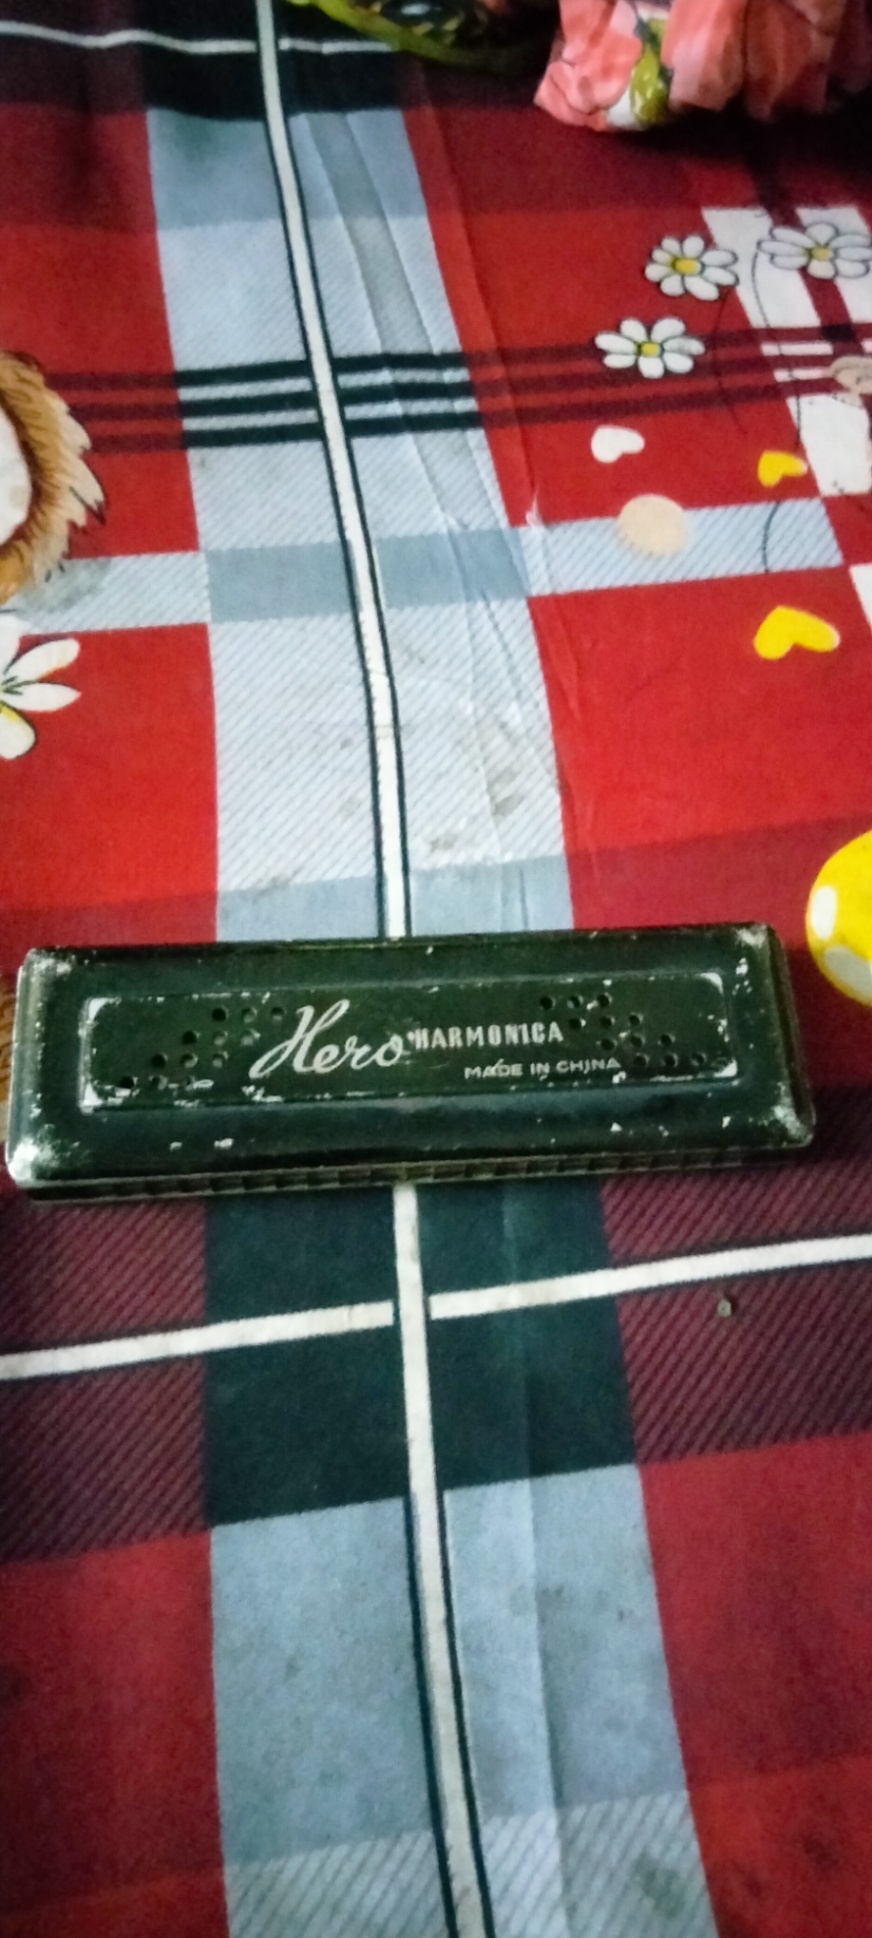 Musical Instruments for sale; Very good condition